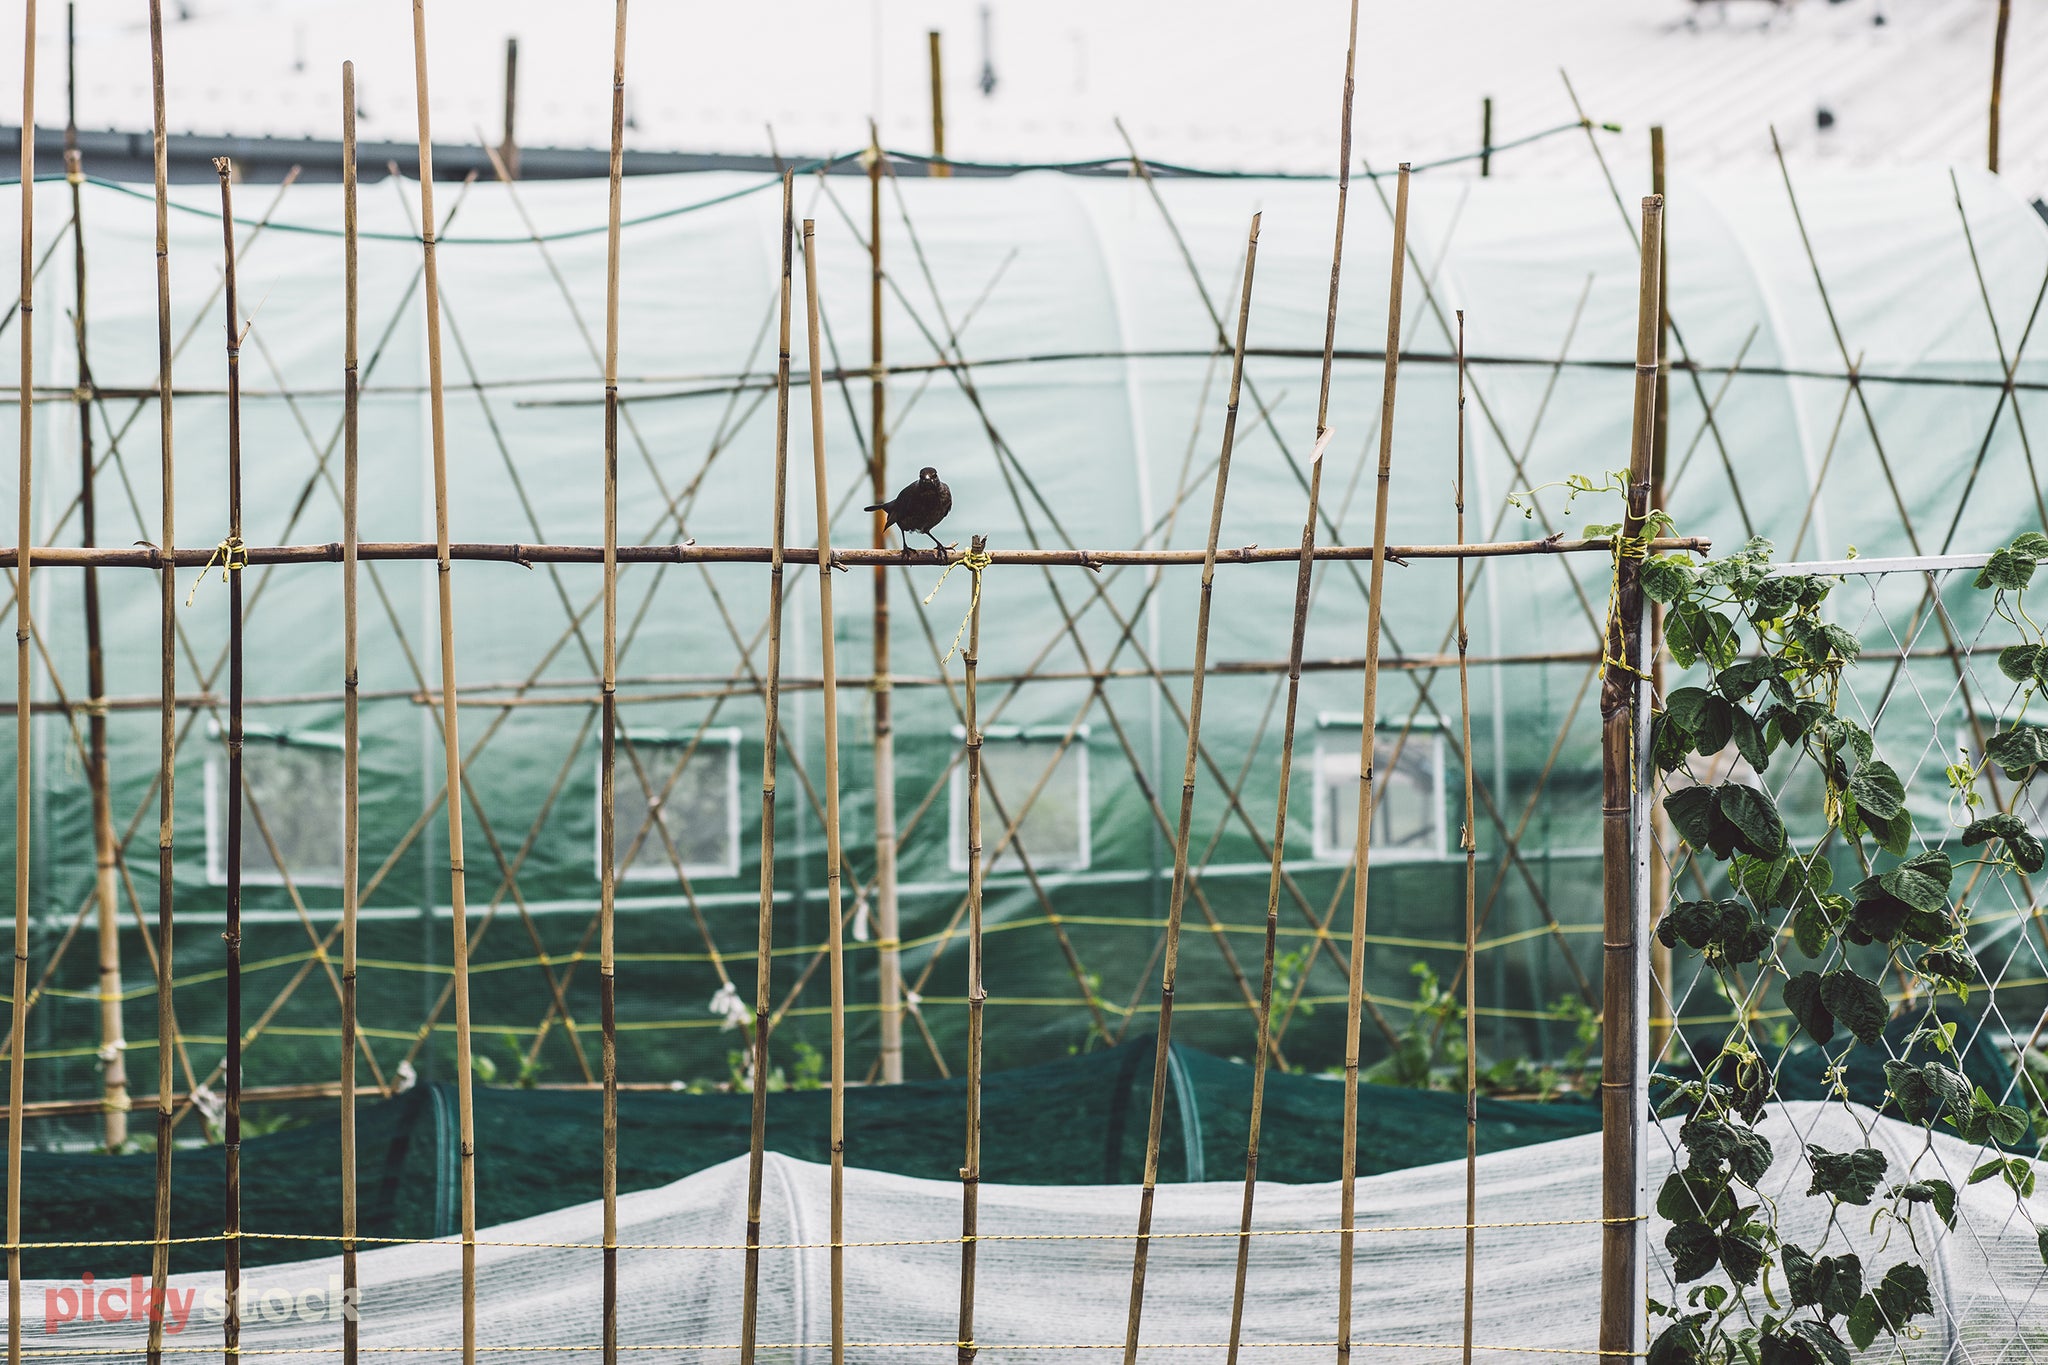 Small black bird sits on wooden hand-made fencing in community garden.